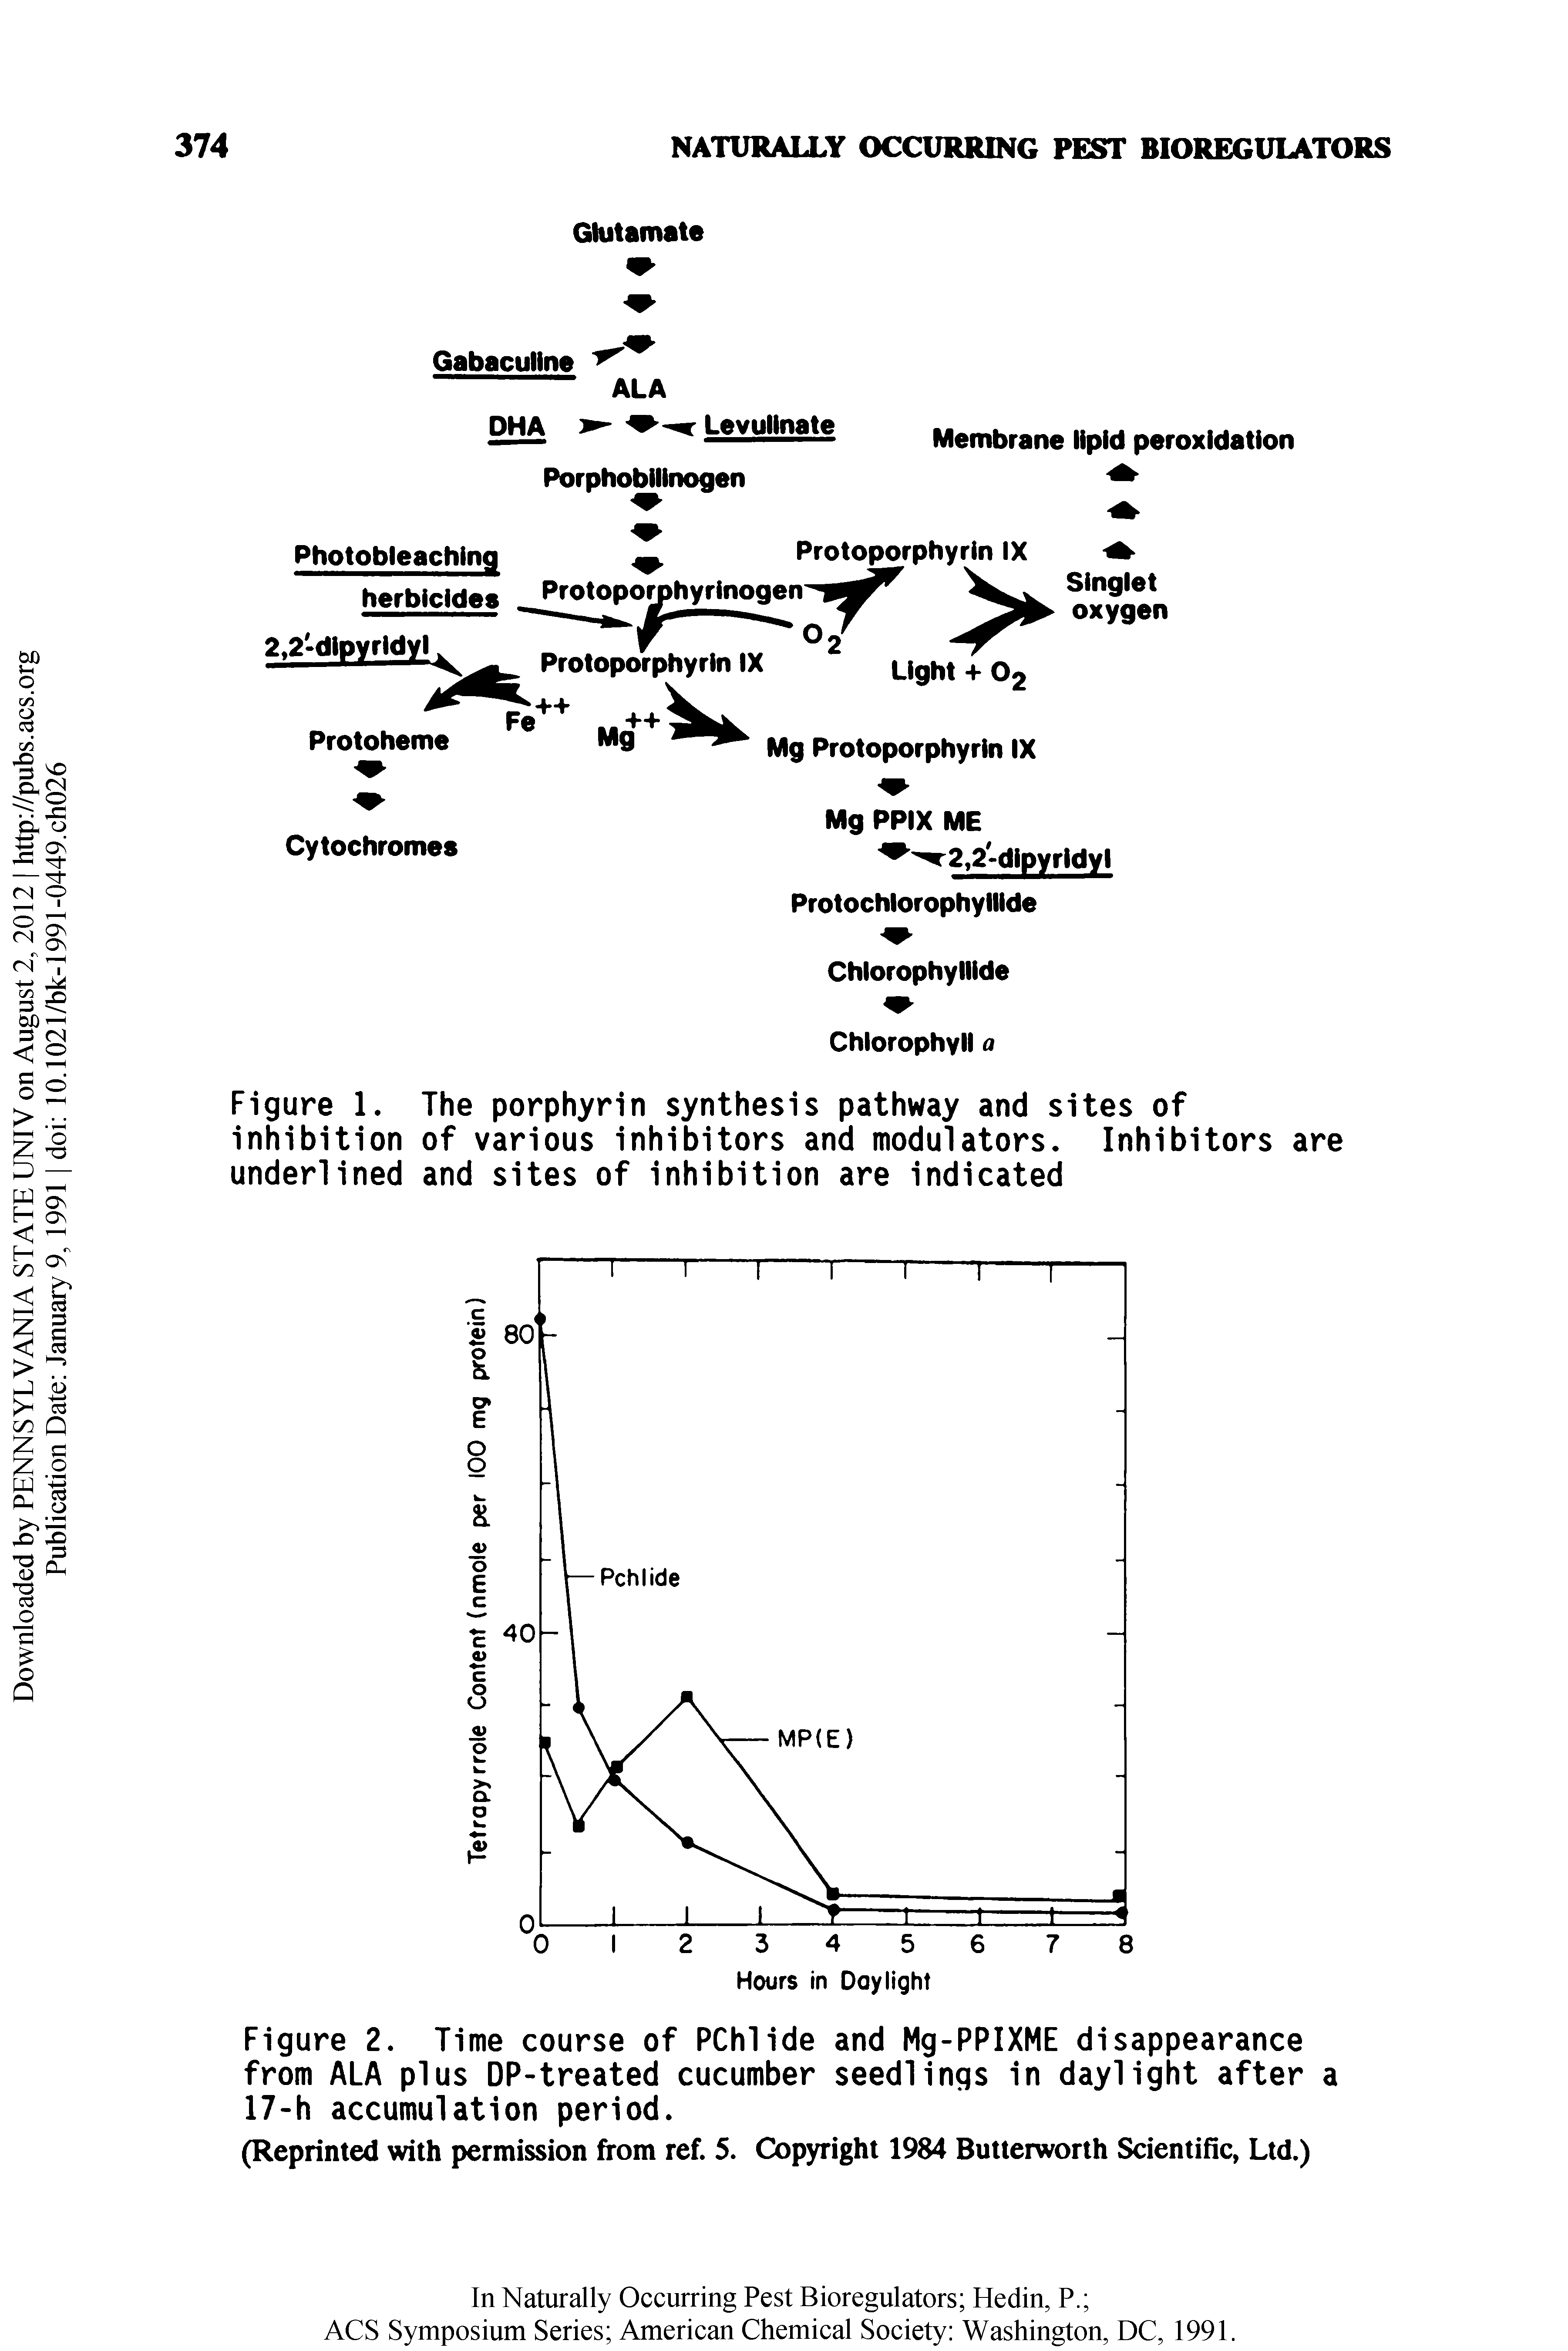 Figure 1. The porphyrin synthesis pathway and sites of inhibition of various inhibitors and modulators. Inhibitors are underlined and sites of inhibition are indicated...